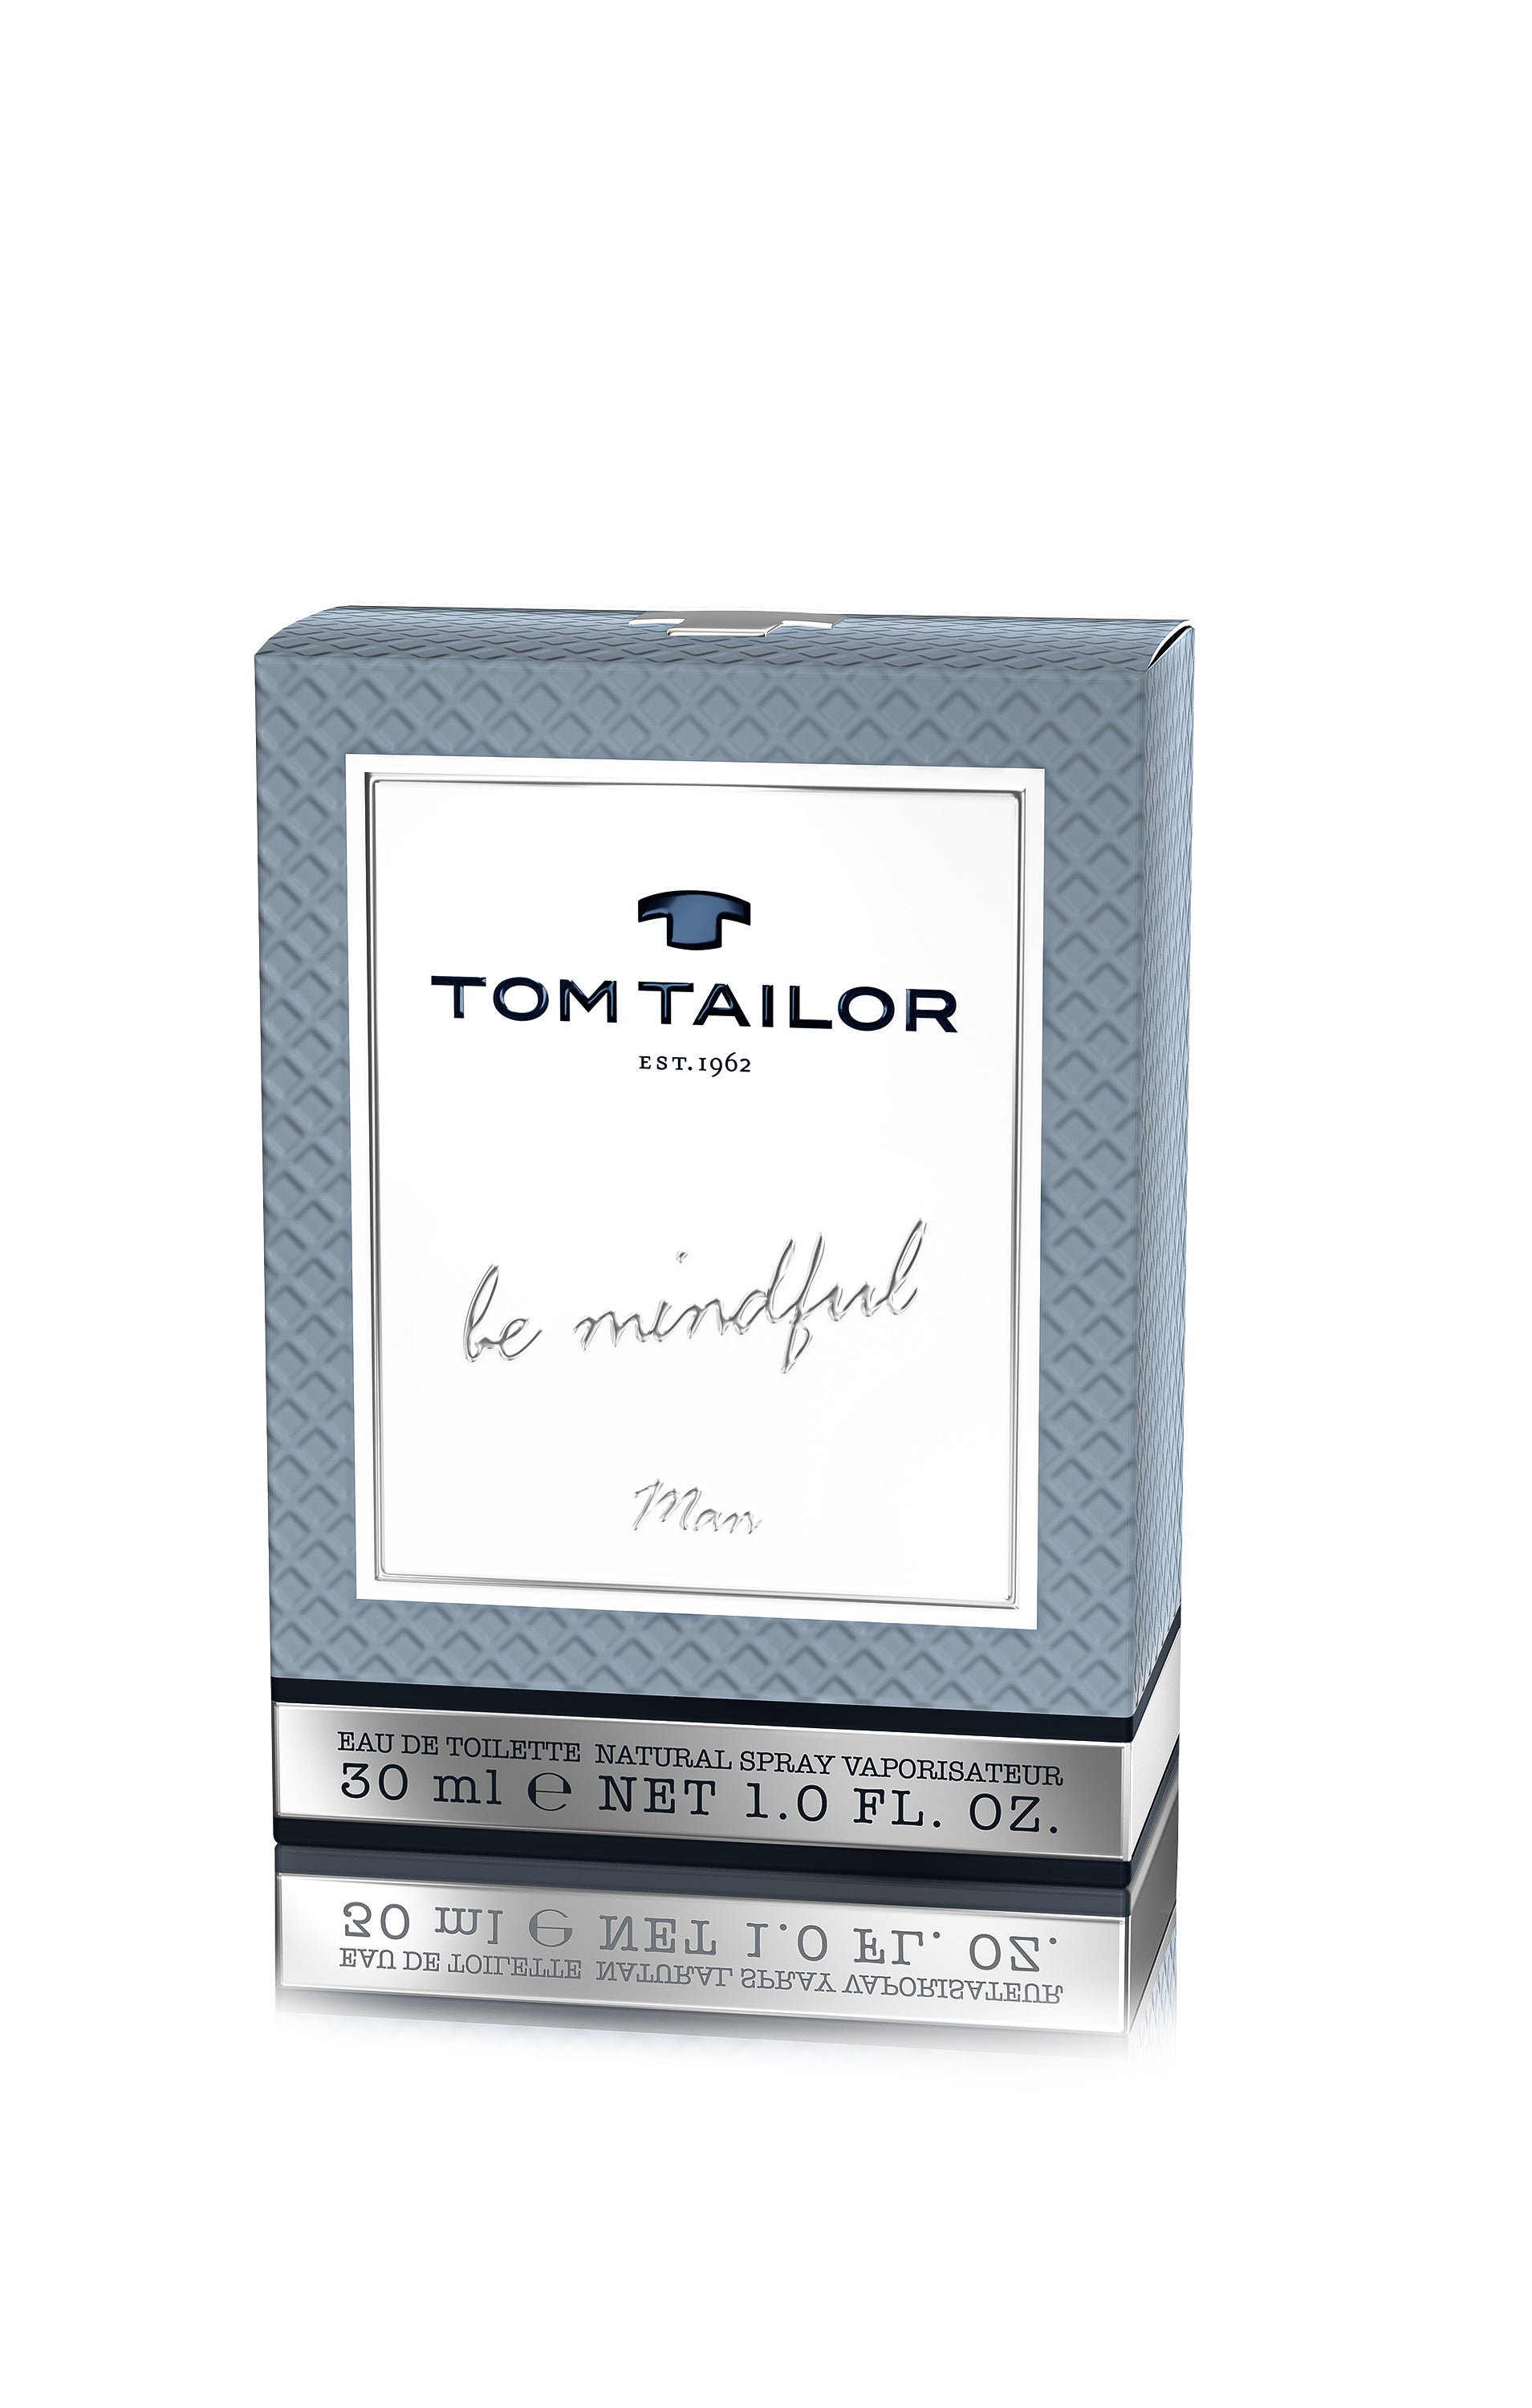 TOM TAILOR – Square MAN MINDFUL Deal BE EDT 30ML